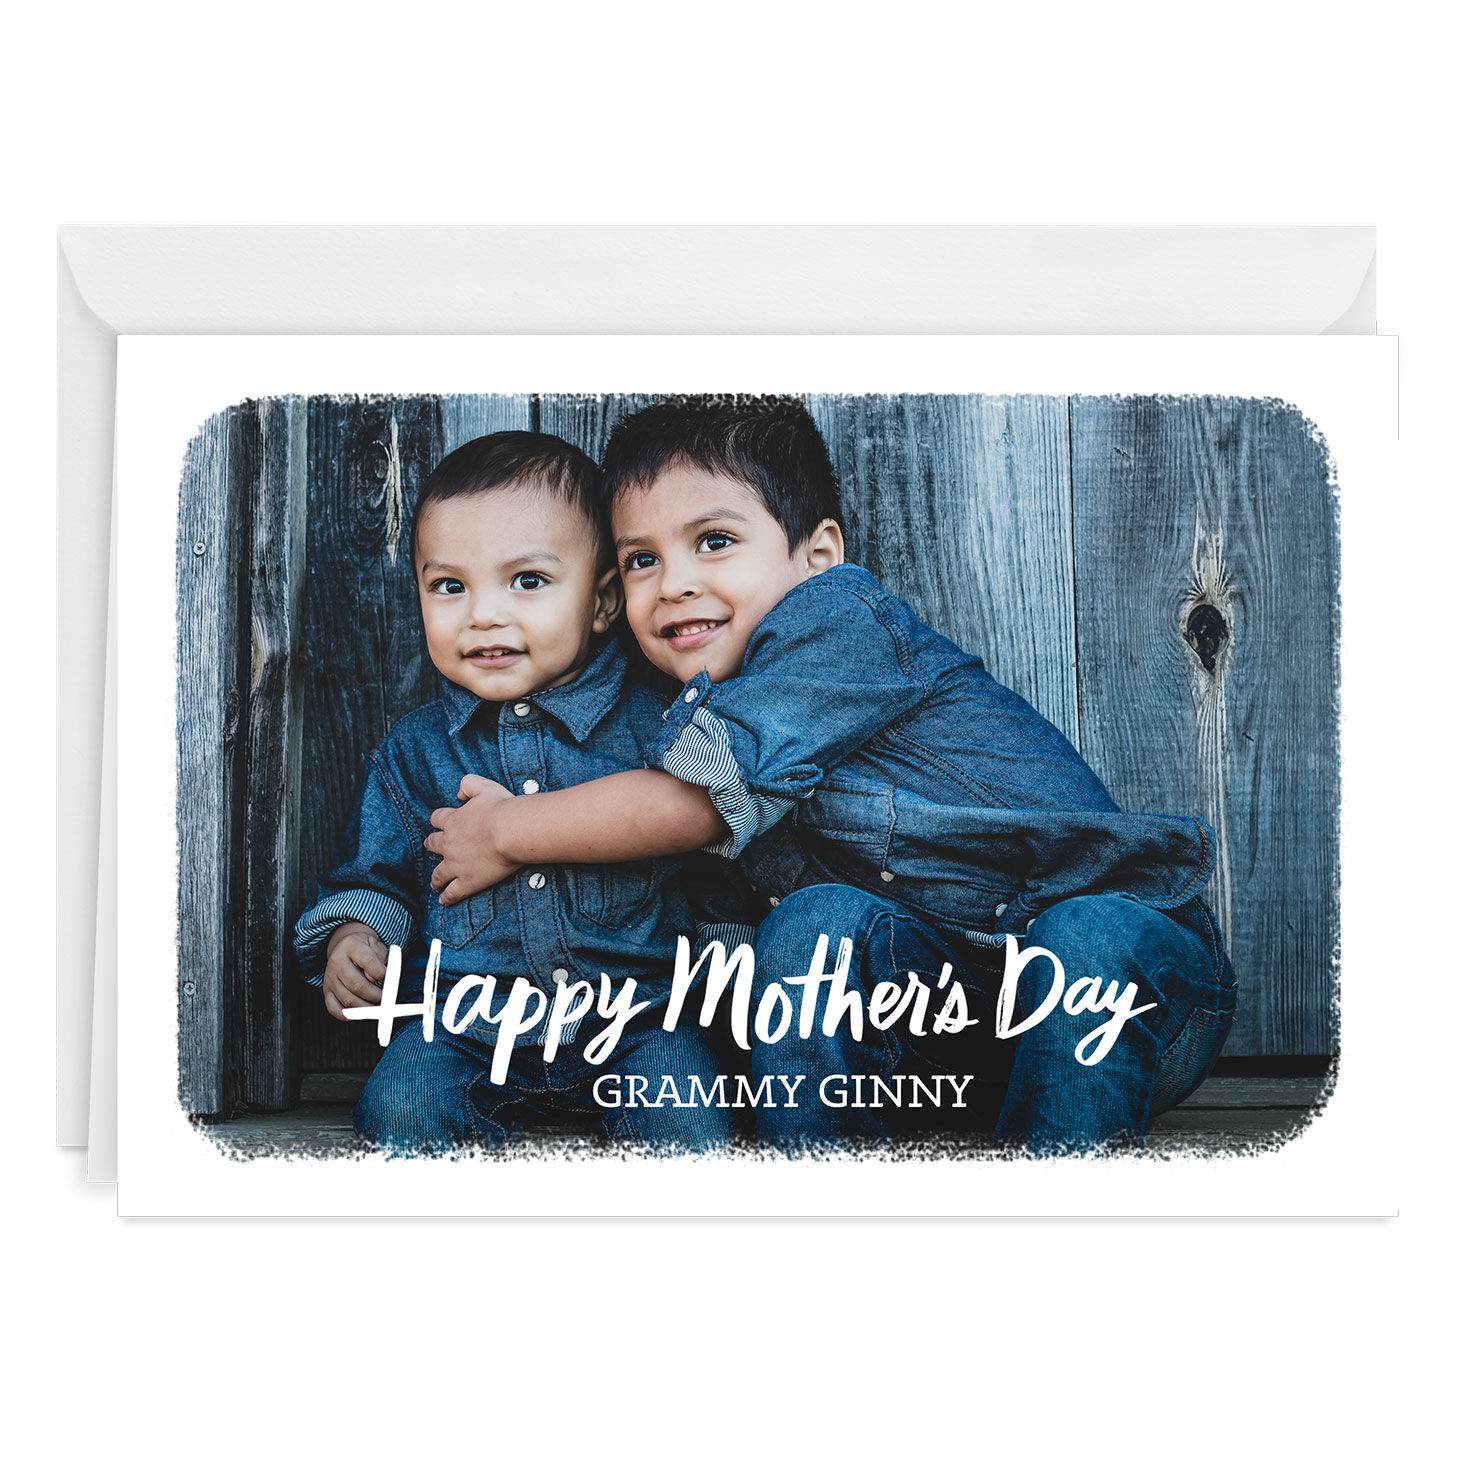 White Frame Horizontal Folded Mother's Day Photo Card for only USD 4.99 | Hallmark